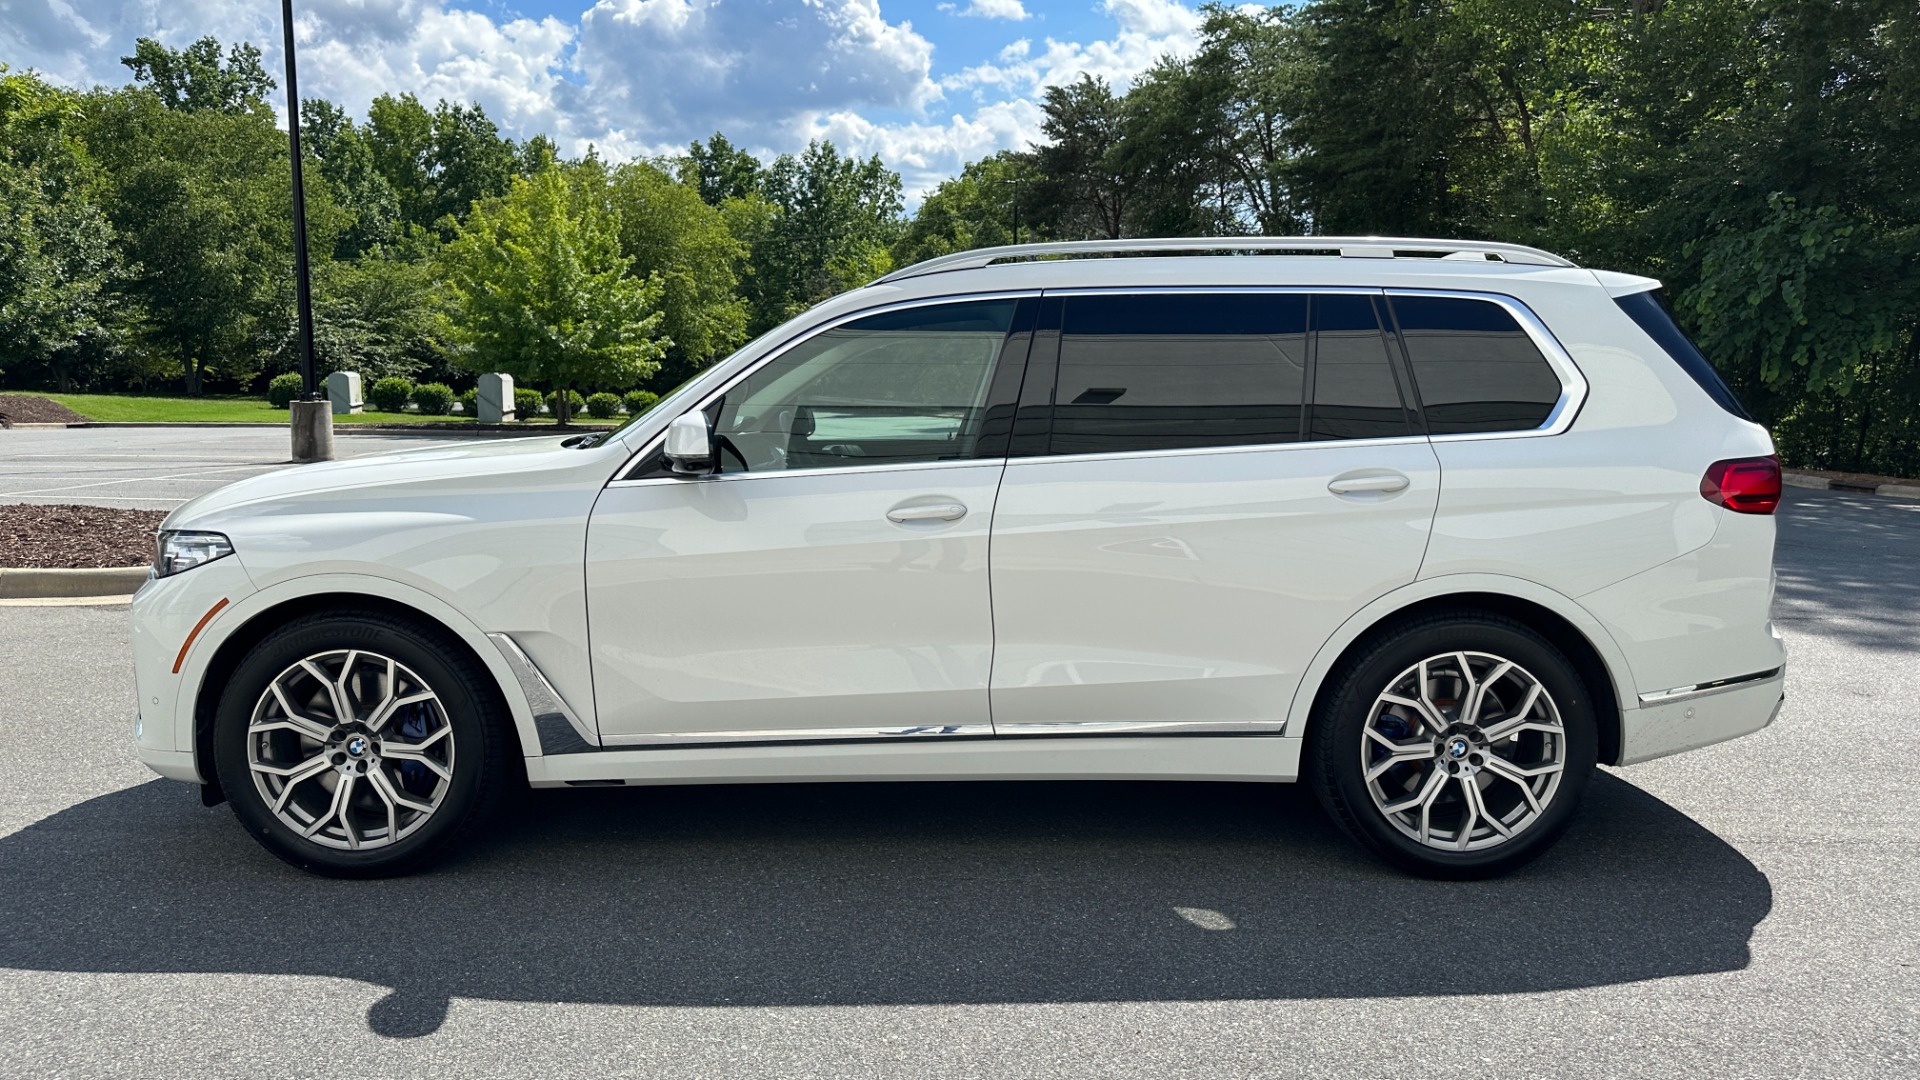 Used 2020 BMW X7 xDrive40i / HK SOUND / COLD WEATHER / REMOTE START / M SPORT BRAKES for sale $55,995 at Formula Imports in Charlotte NC 28227 6